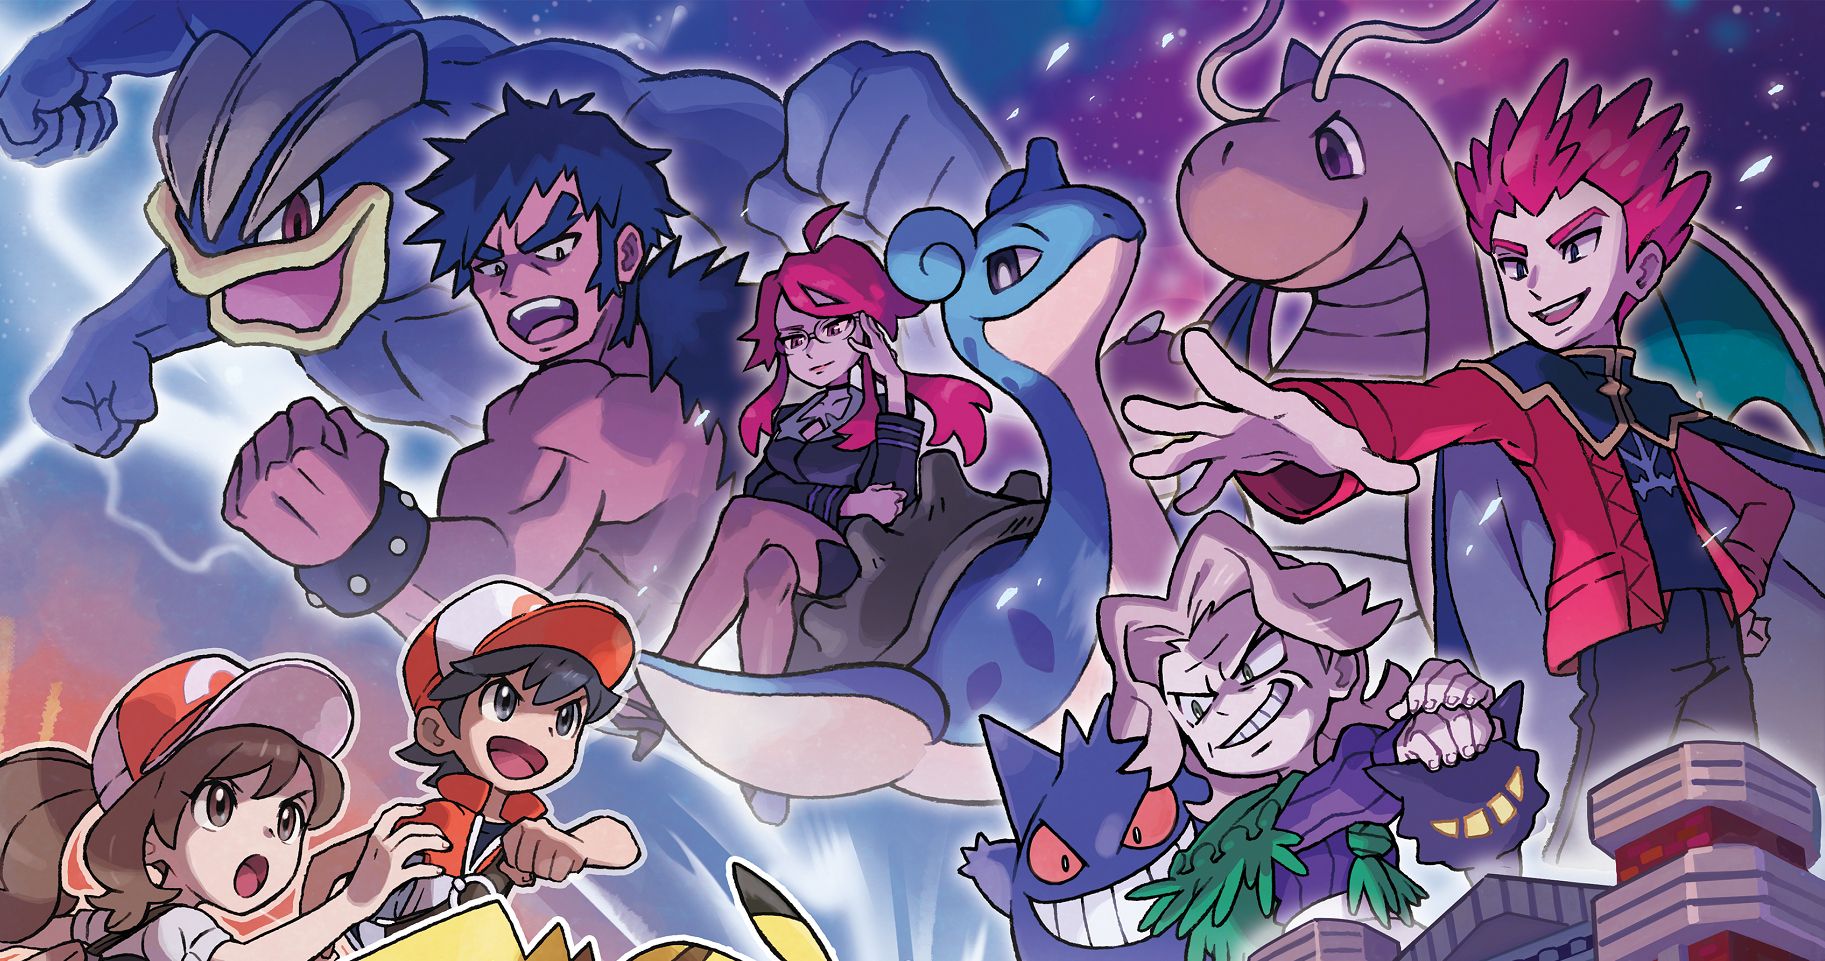 Pokémon The Most Powerful Elite Four Members Ranked According To Strength